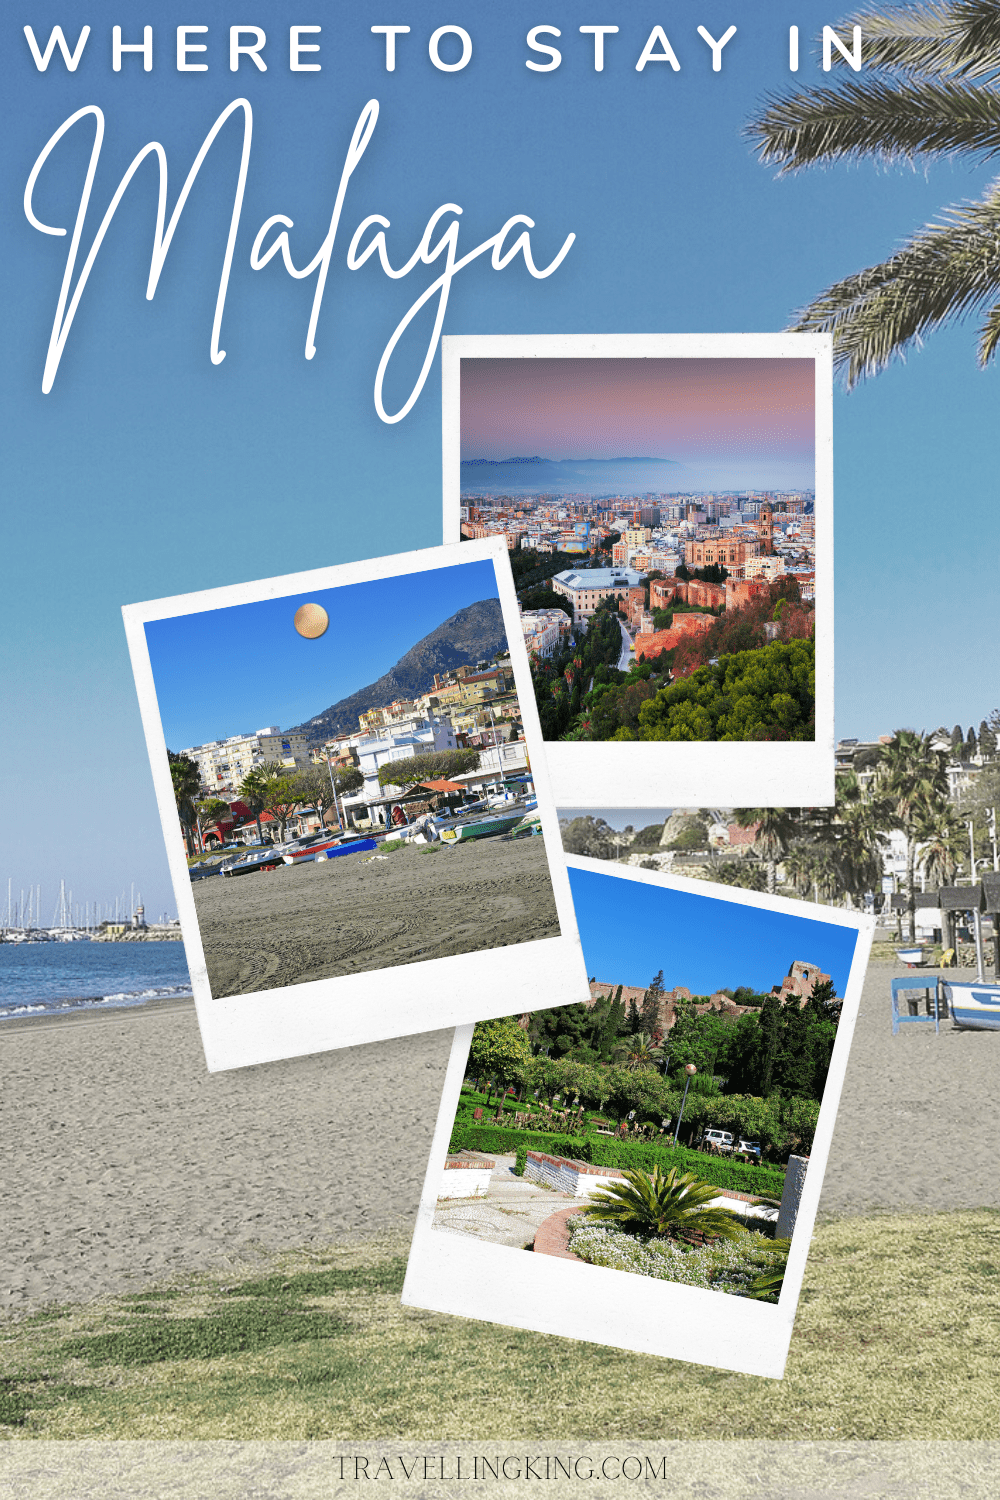 Where to stay in Malaga